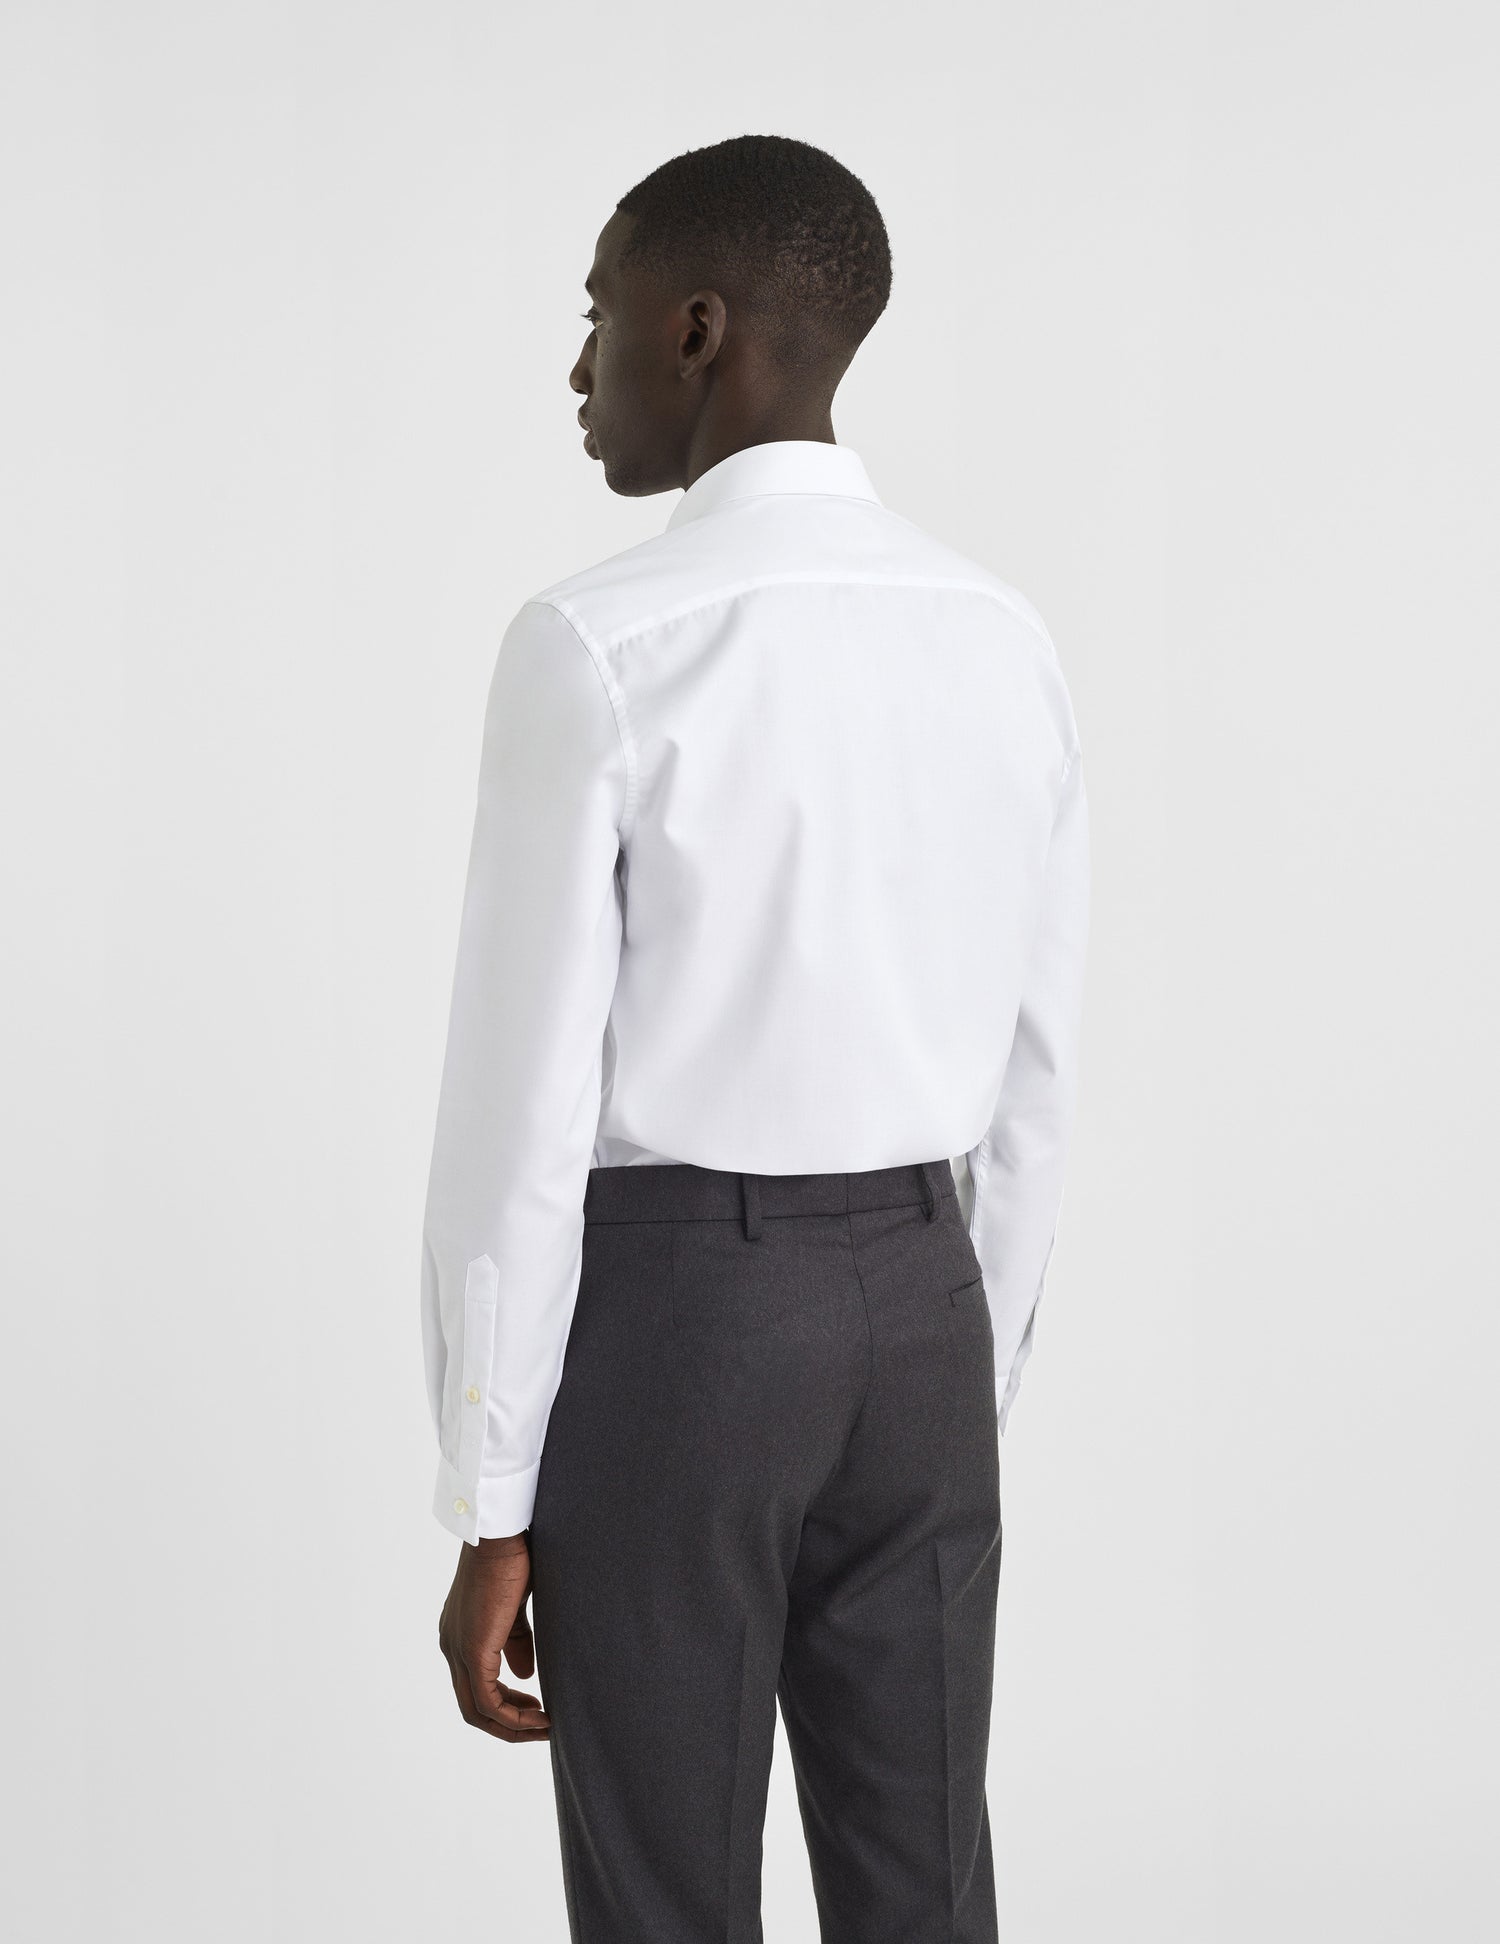 Fitted white shirt - Shaped - Thin Collar#4